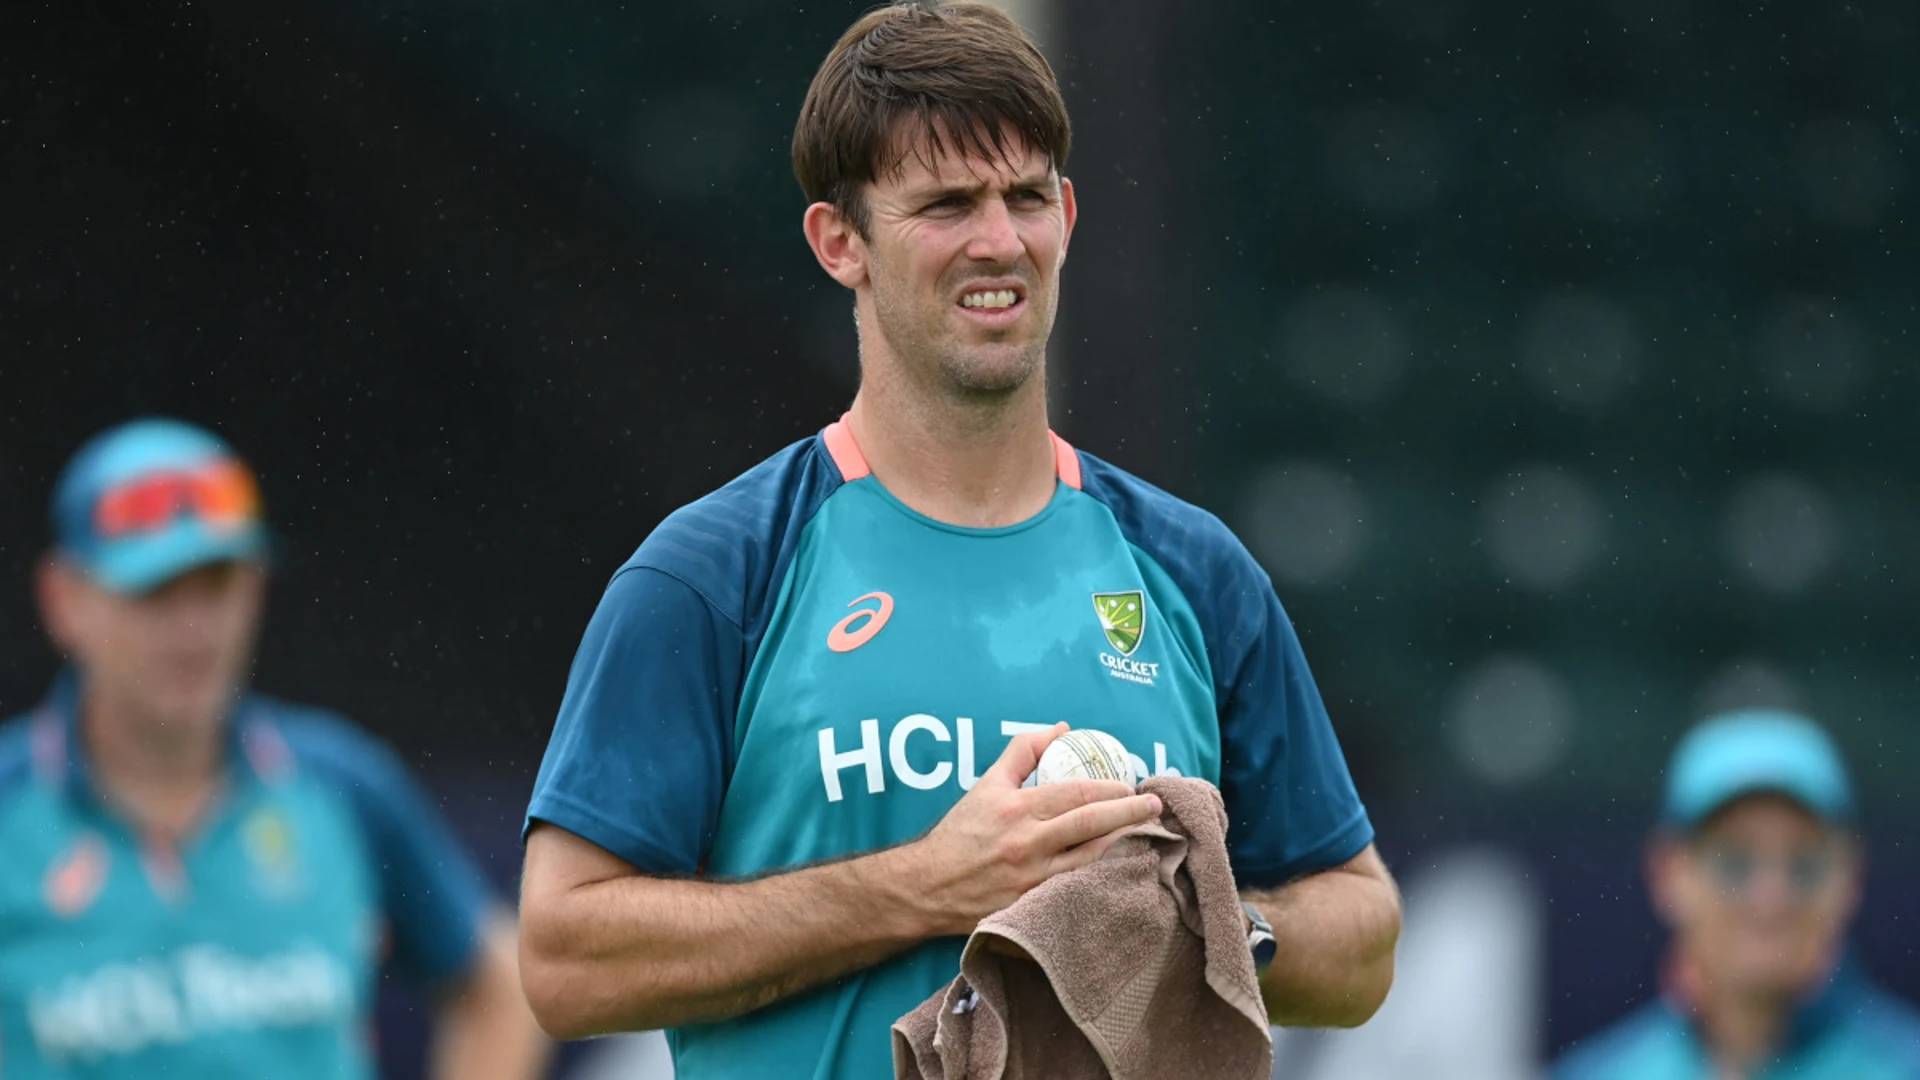 Australia skipper Marsh says he's ready to bowl at T20 World Cup